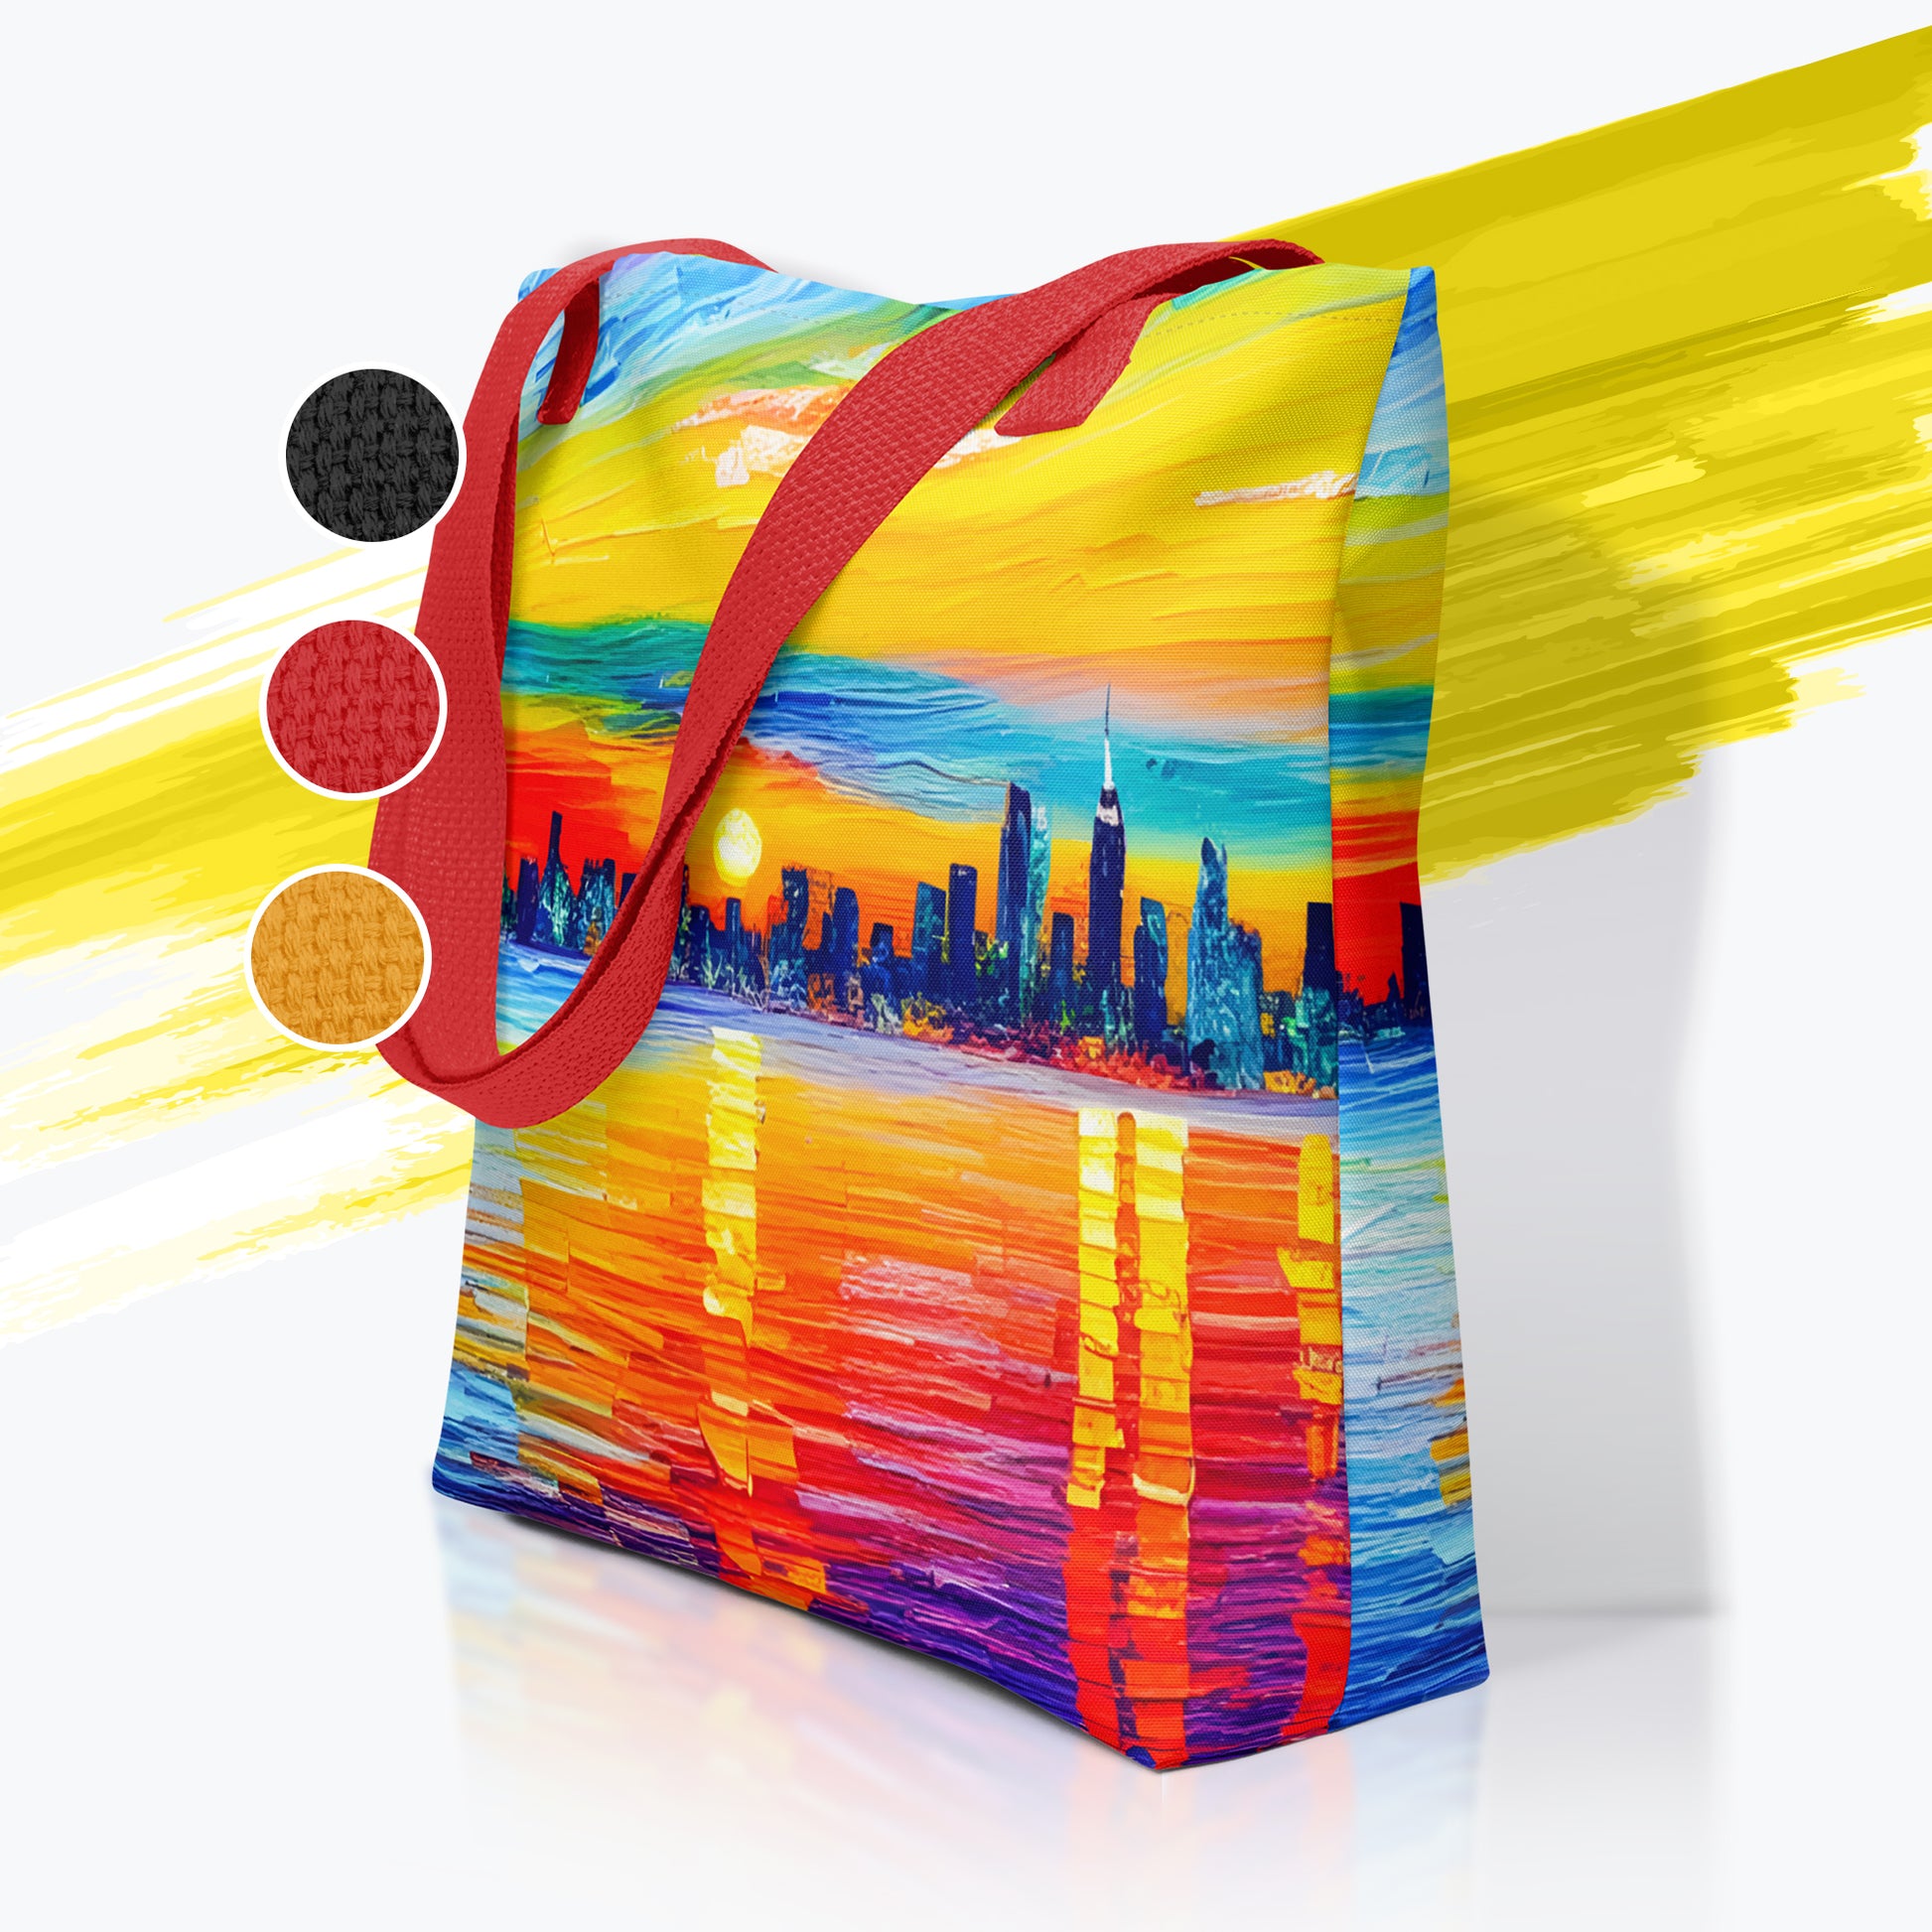 Large tote bag with cityscape painting - New York | Seepu